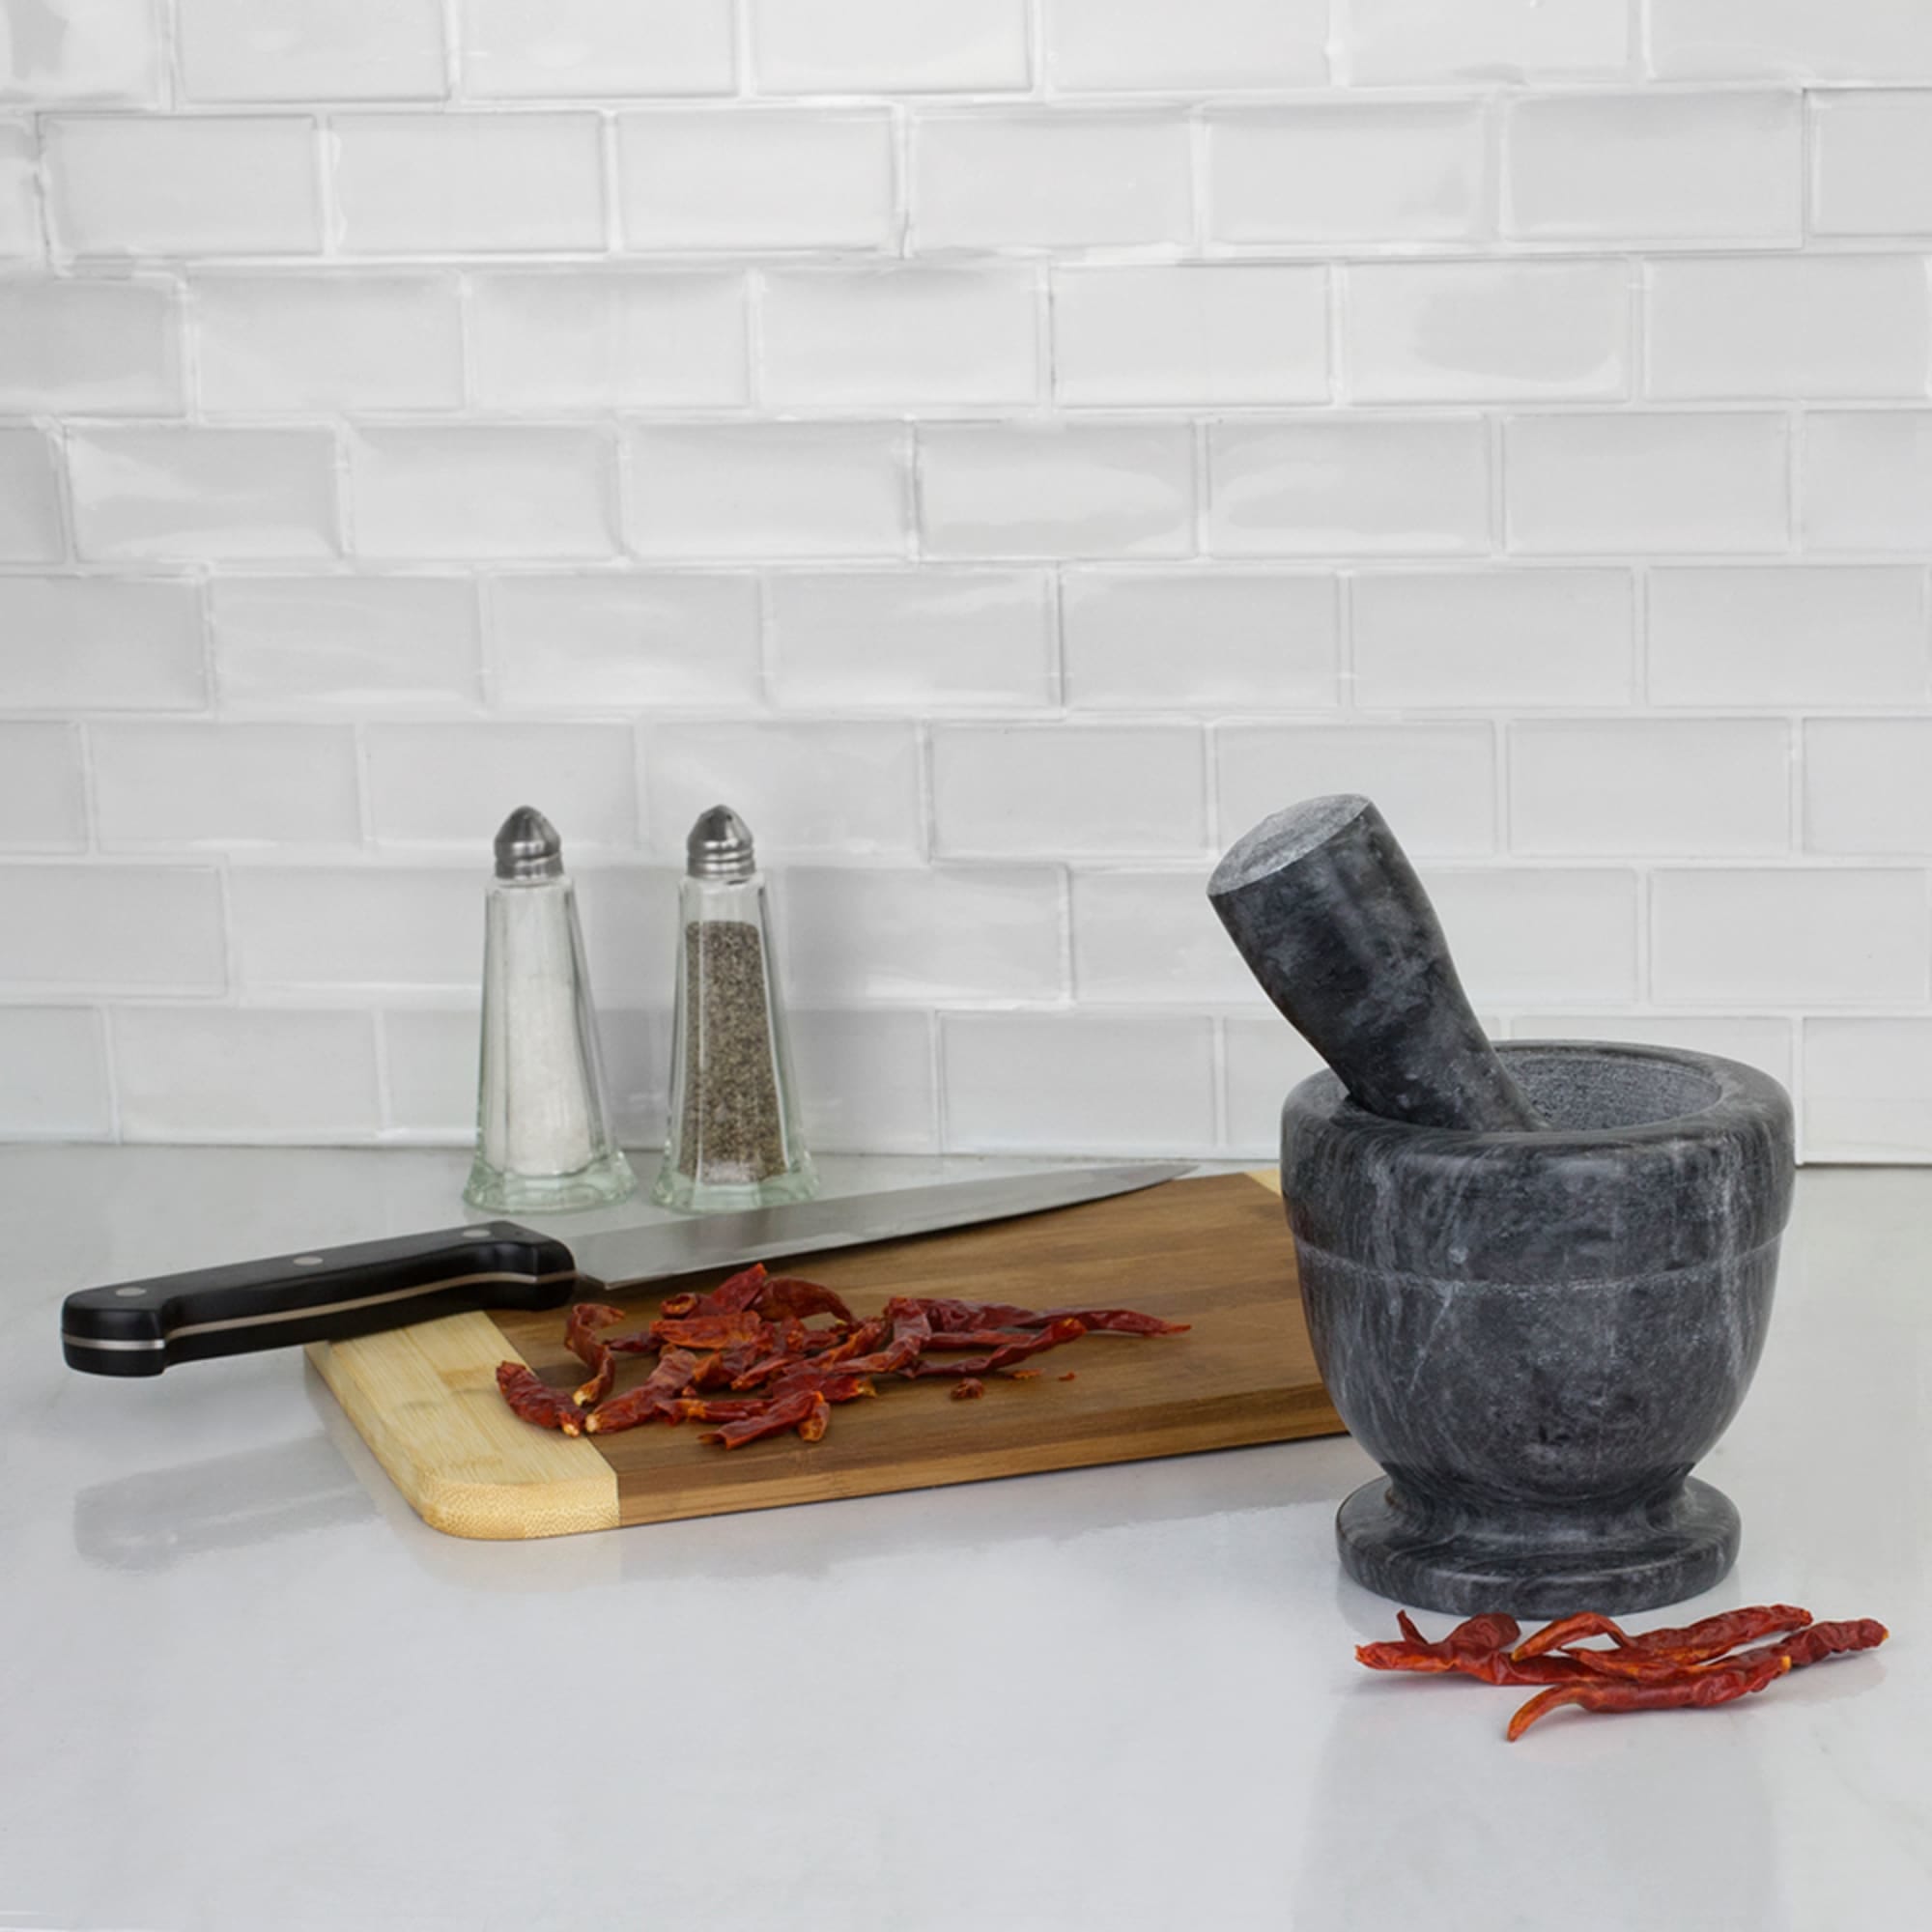 Home Basics Marble Mortar and Pestle, Black $6.00 EACH, CASE PACK OF 12